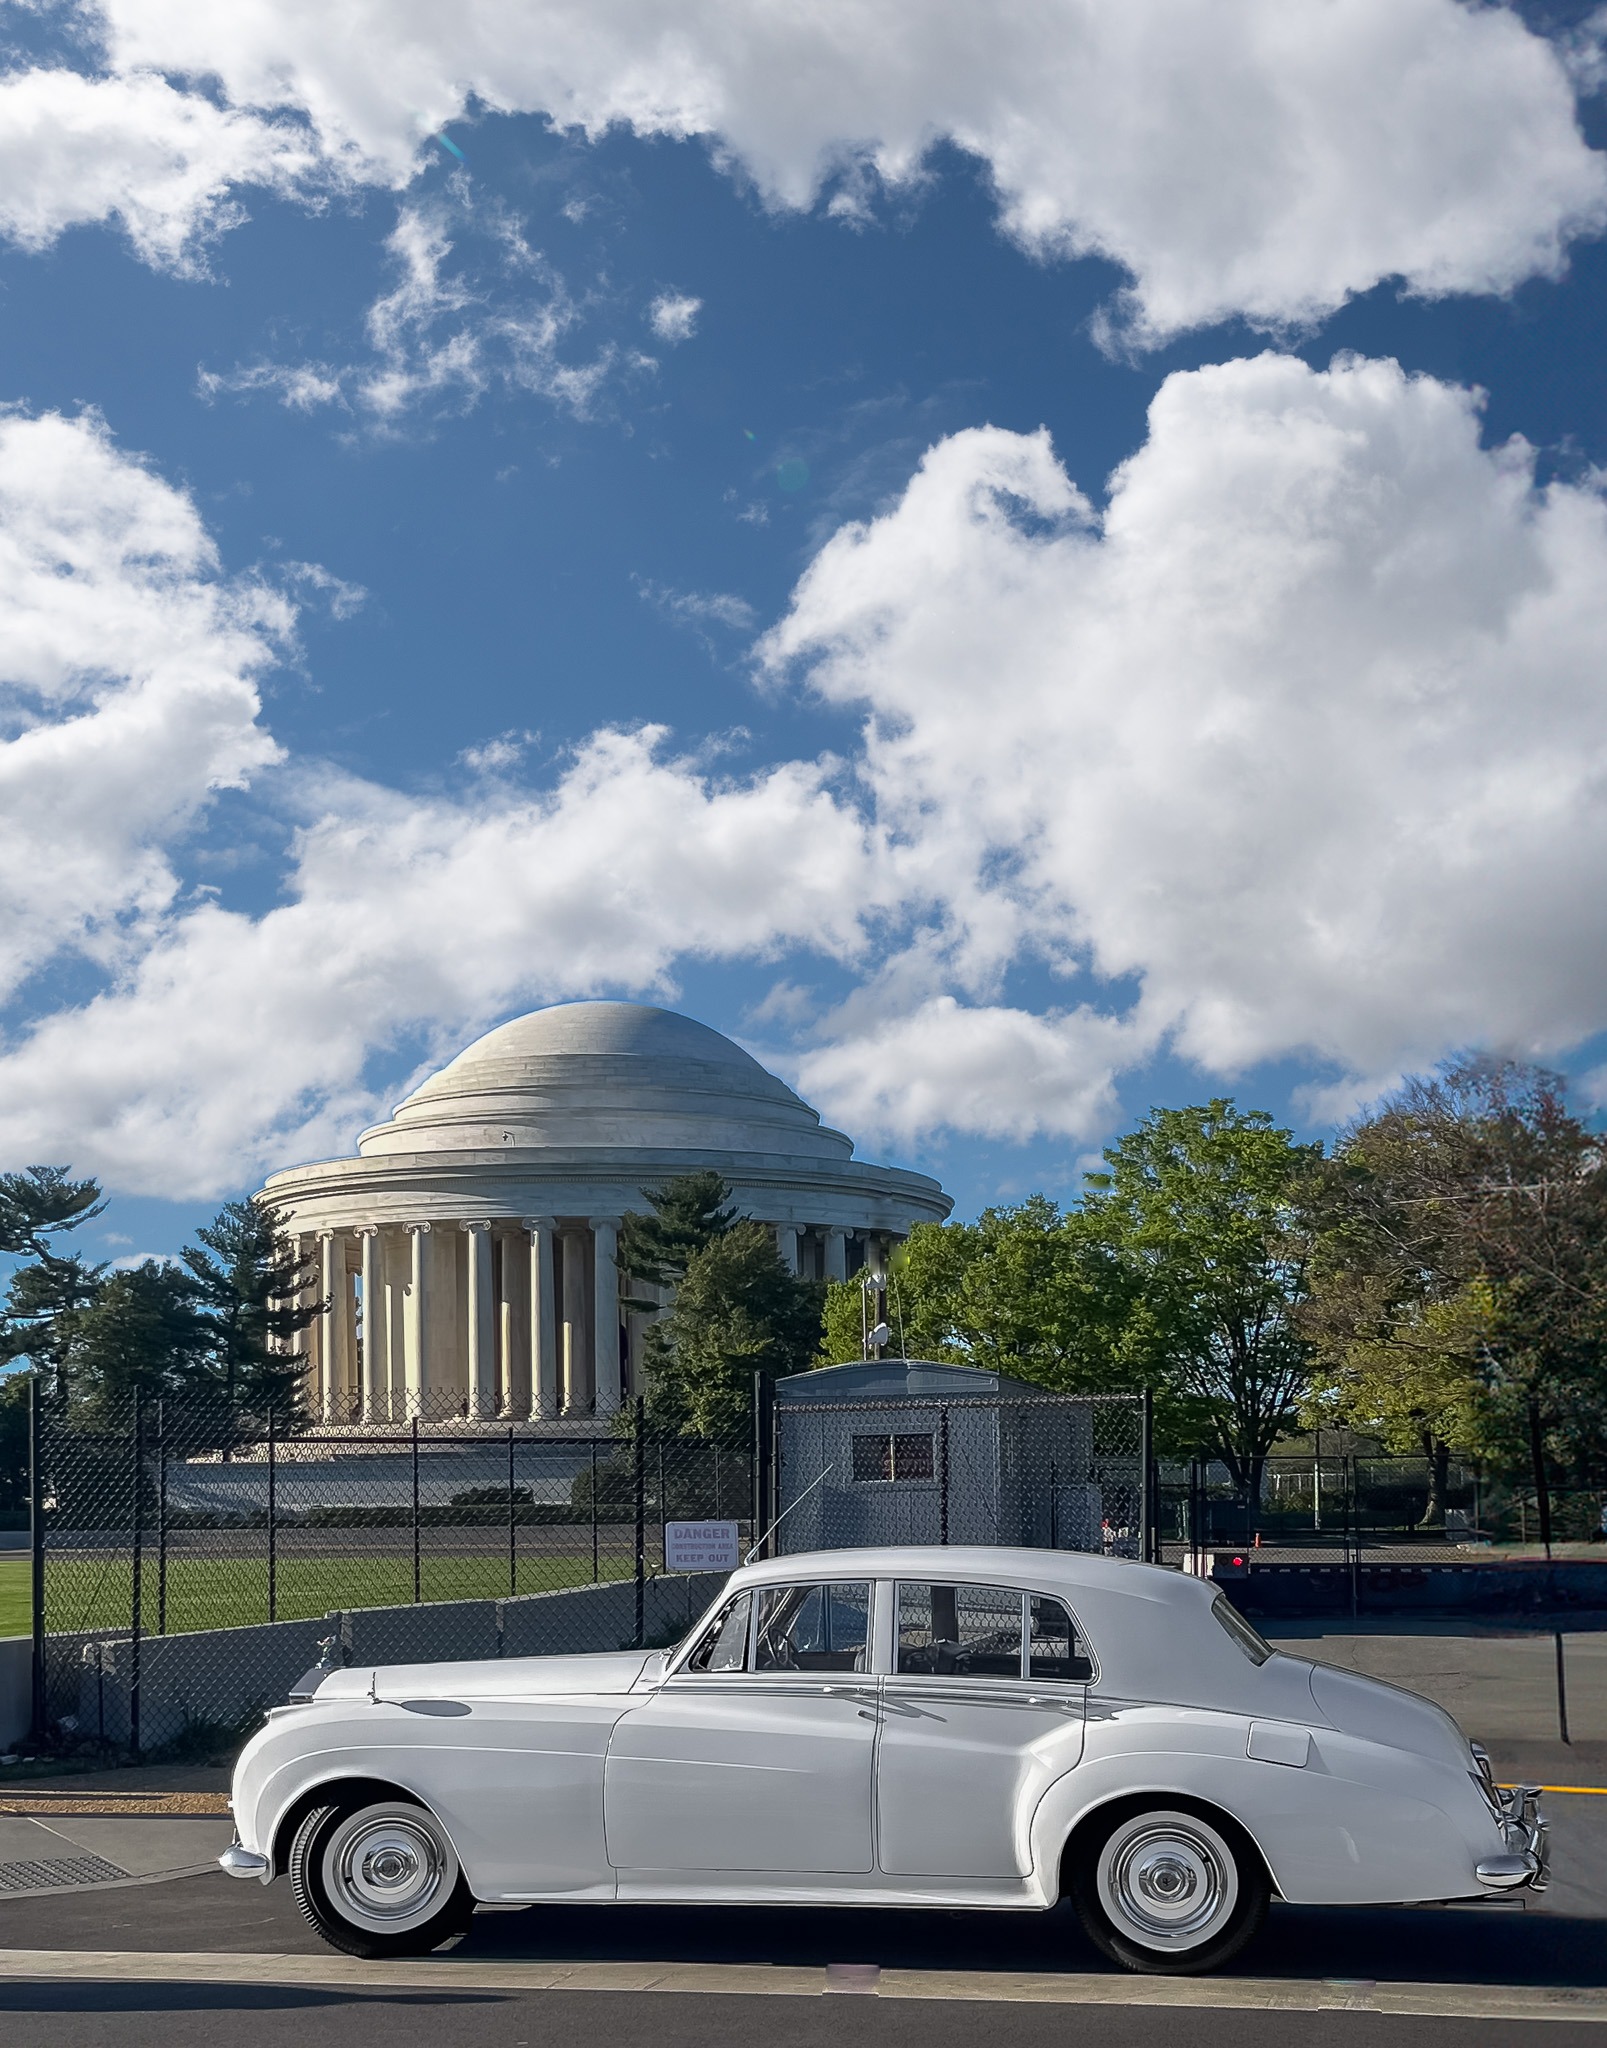 Photo of a white Rolls Royce in front of the Jefferson Memorial in Washington DC